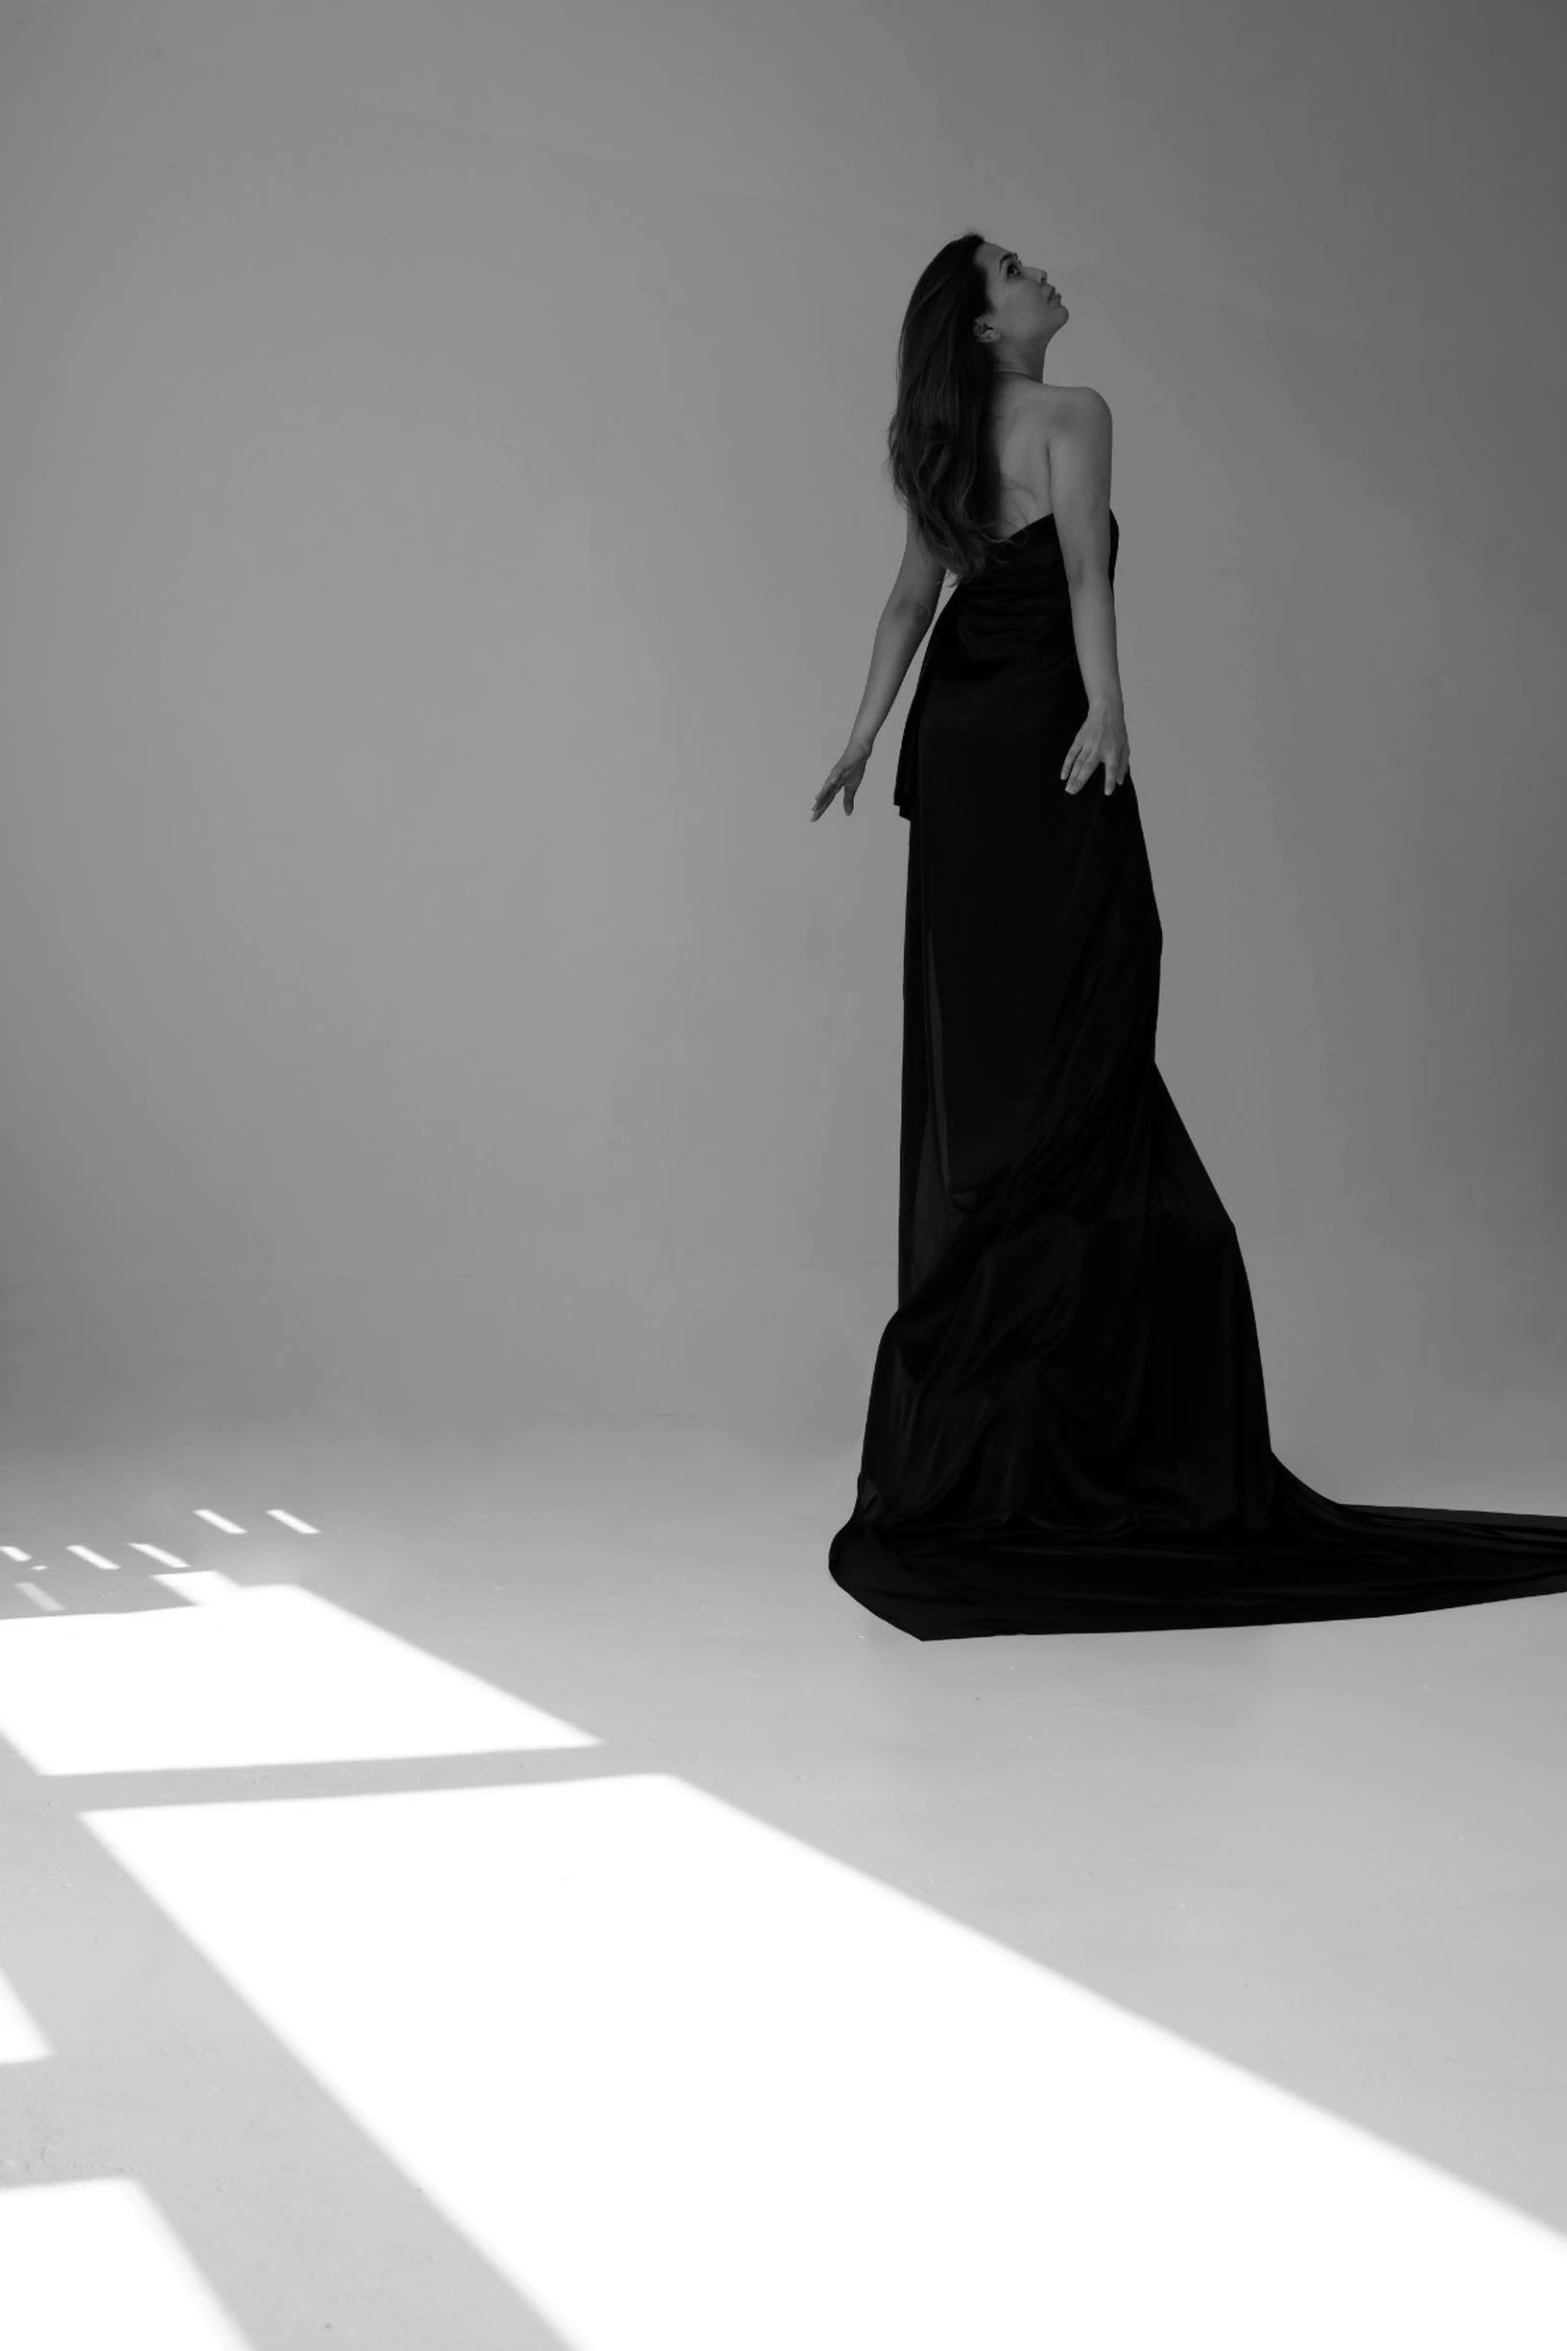 a black and white photo of a woman in a dress, tumblr, conceptual art, dark black long dress, alternate album cover, sunny lighting, showstudio